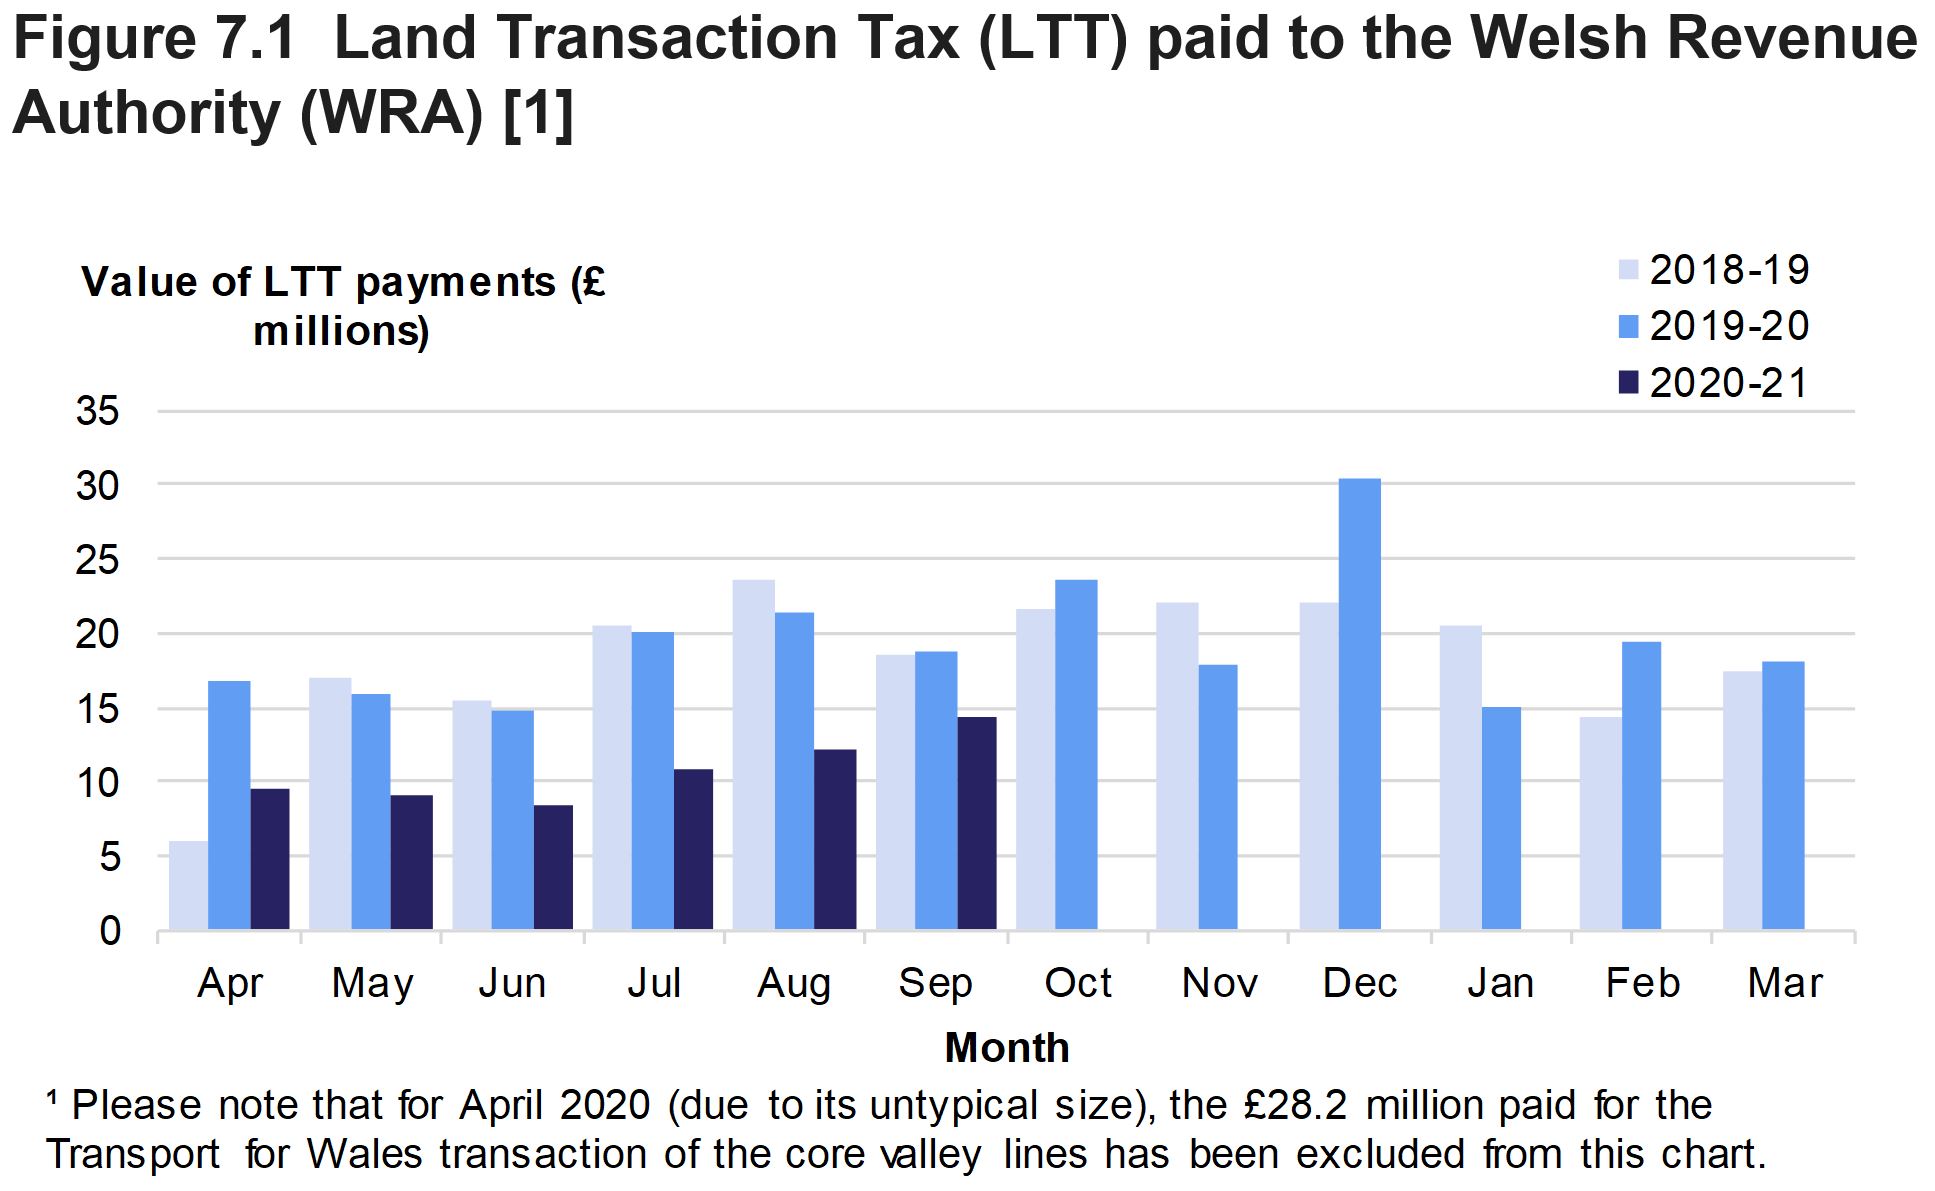 Figure 7.1 shows the monthly amounts of Land Transaction Tax paid to the Welsh Revenue Authority, for April 2018 to September 2020.